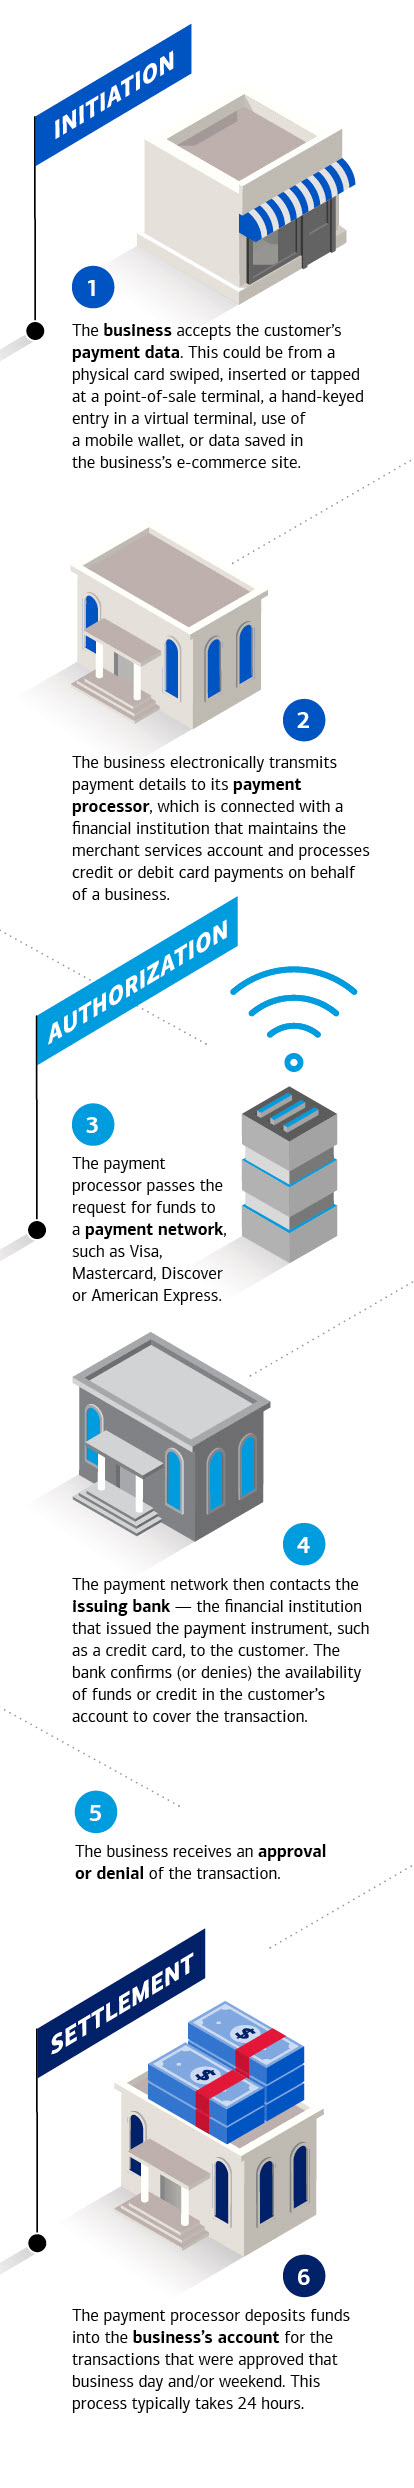 Graphic that shows what happens when a customer makes a credit card transaction and how the payment makes its way from the customer’s bank account to a merchant’s bank account. Visit the link below for a full description.